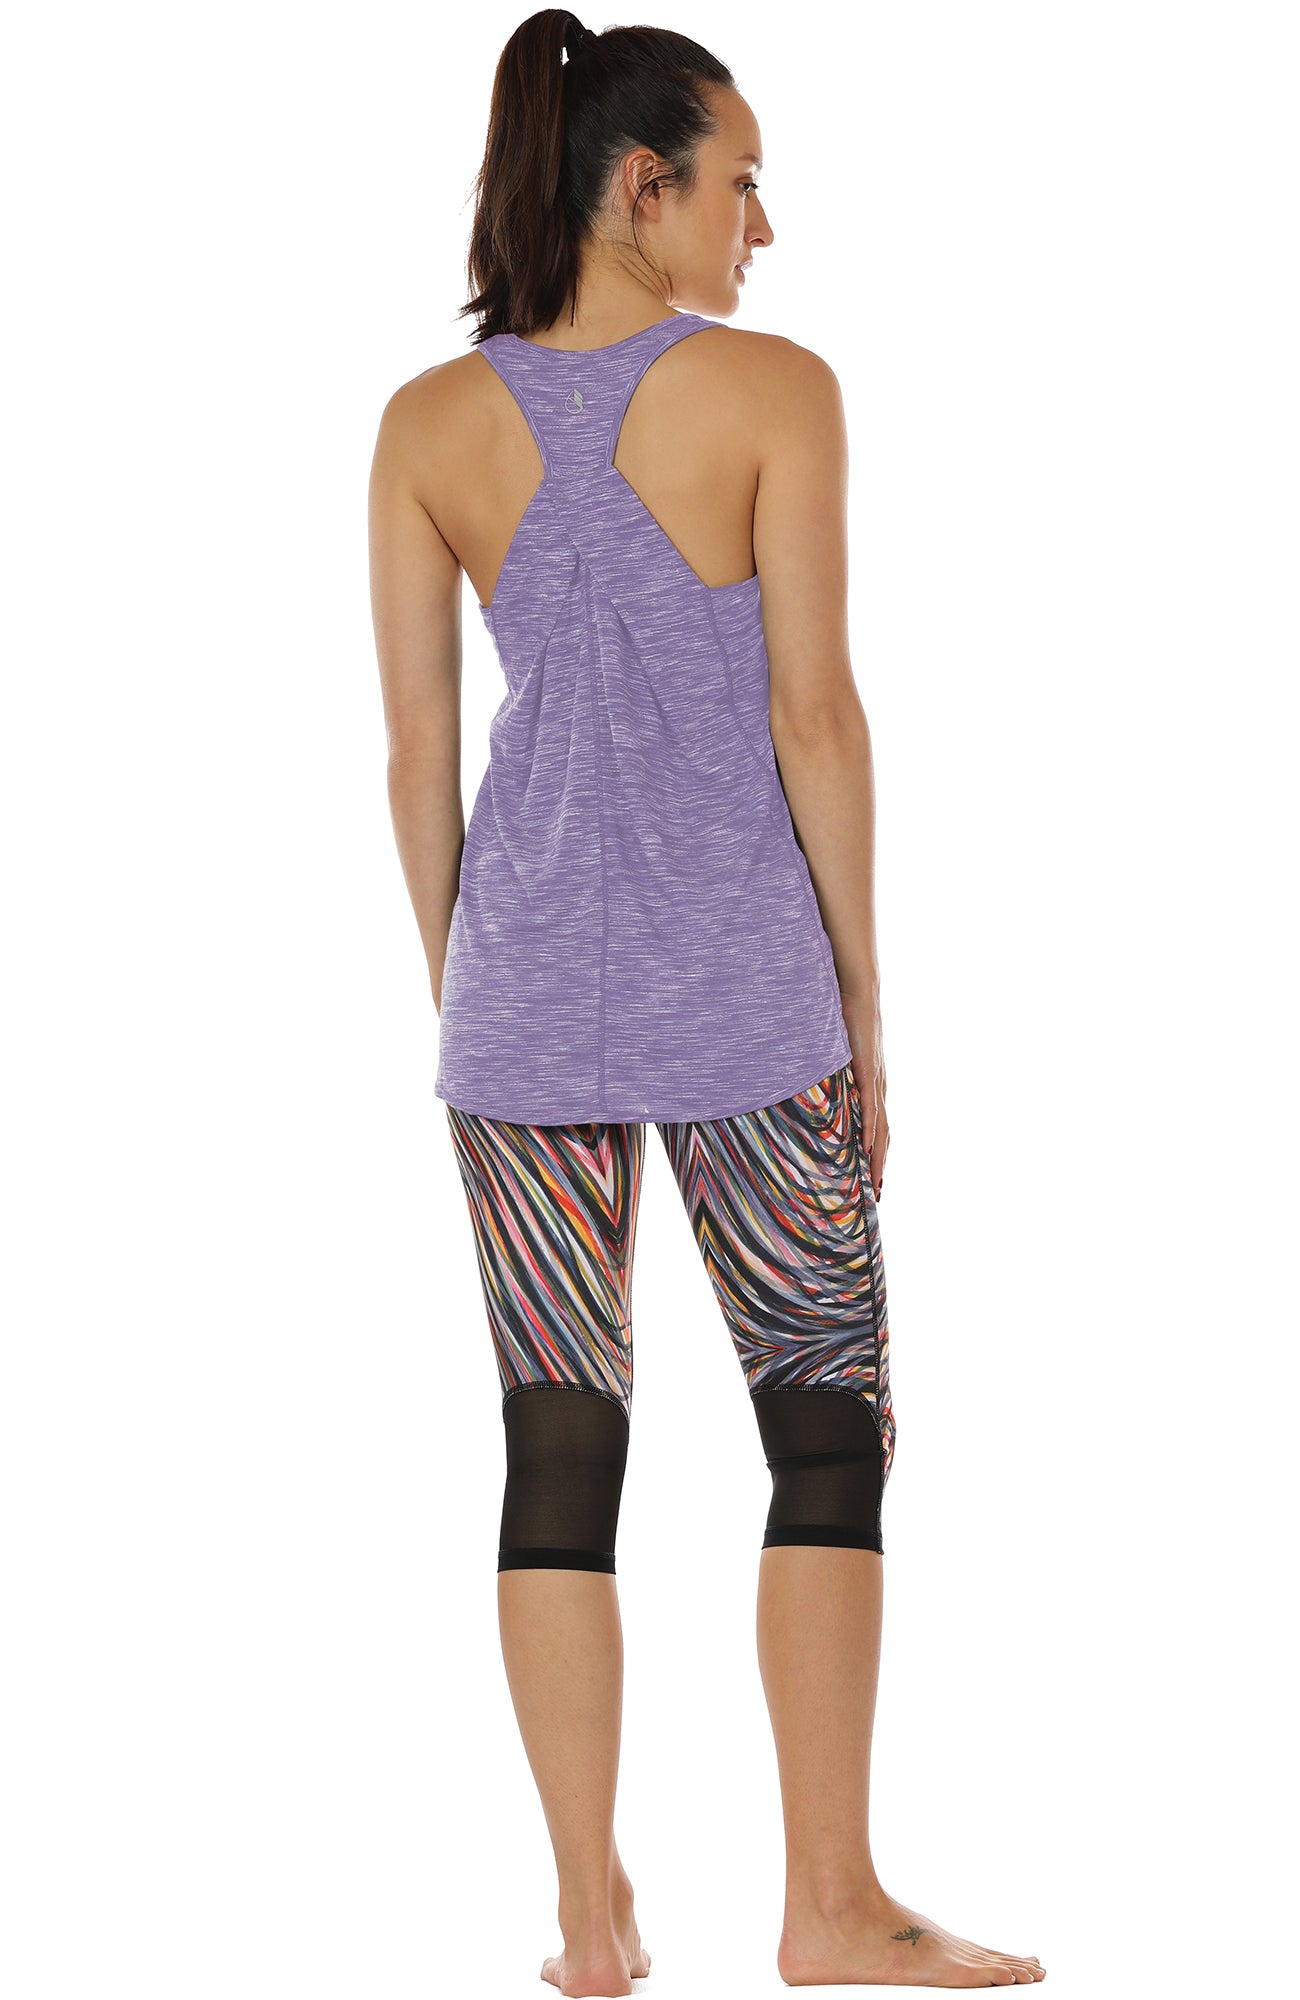  Loovoo Gym Tops Athletic Shirts for Women Womens